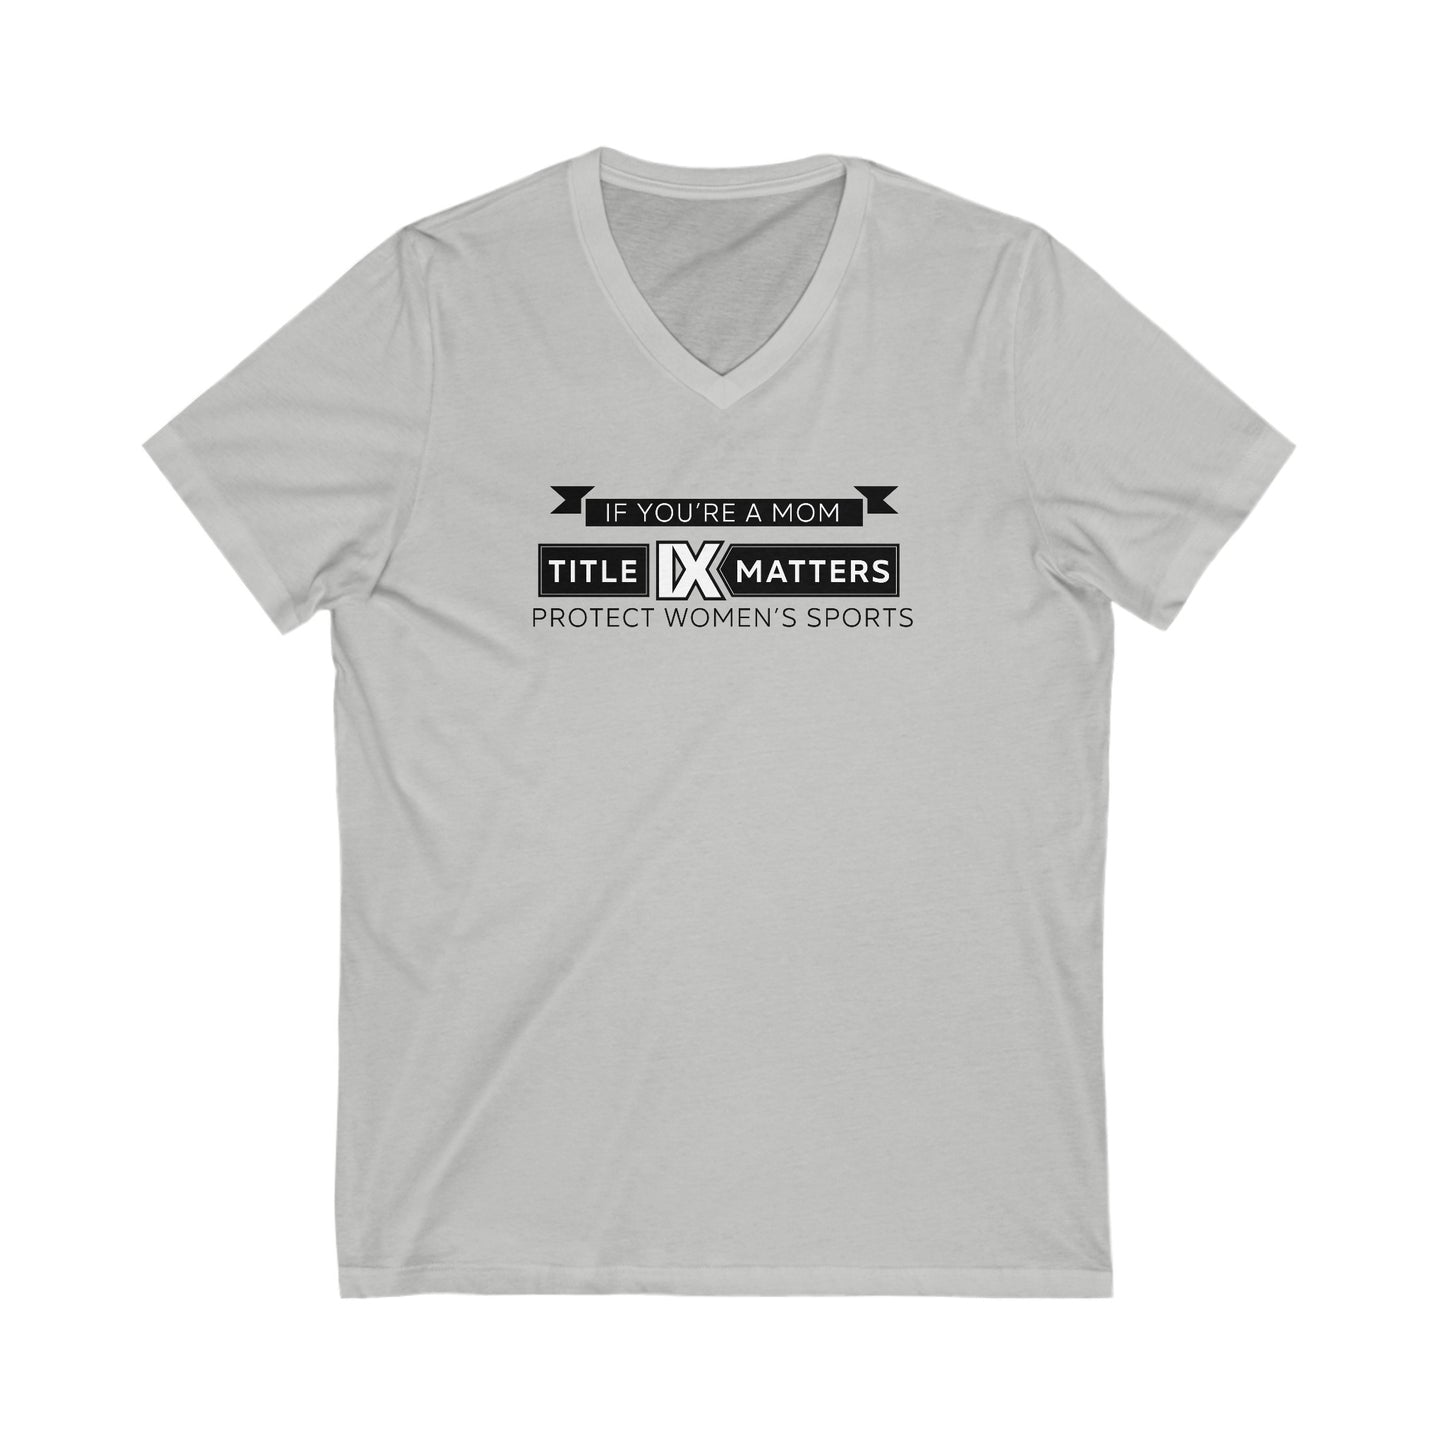 If You're a Mom - Title IX Matters - V-Neck